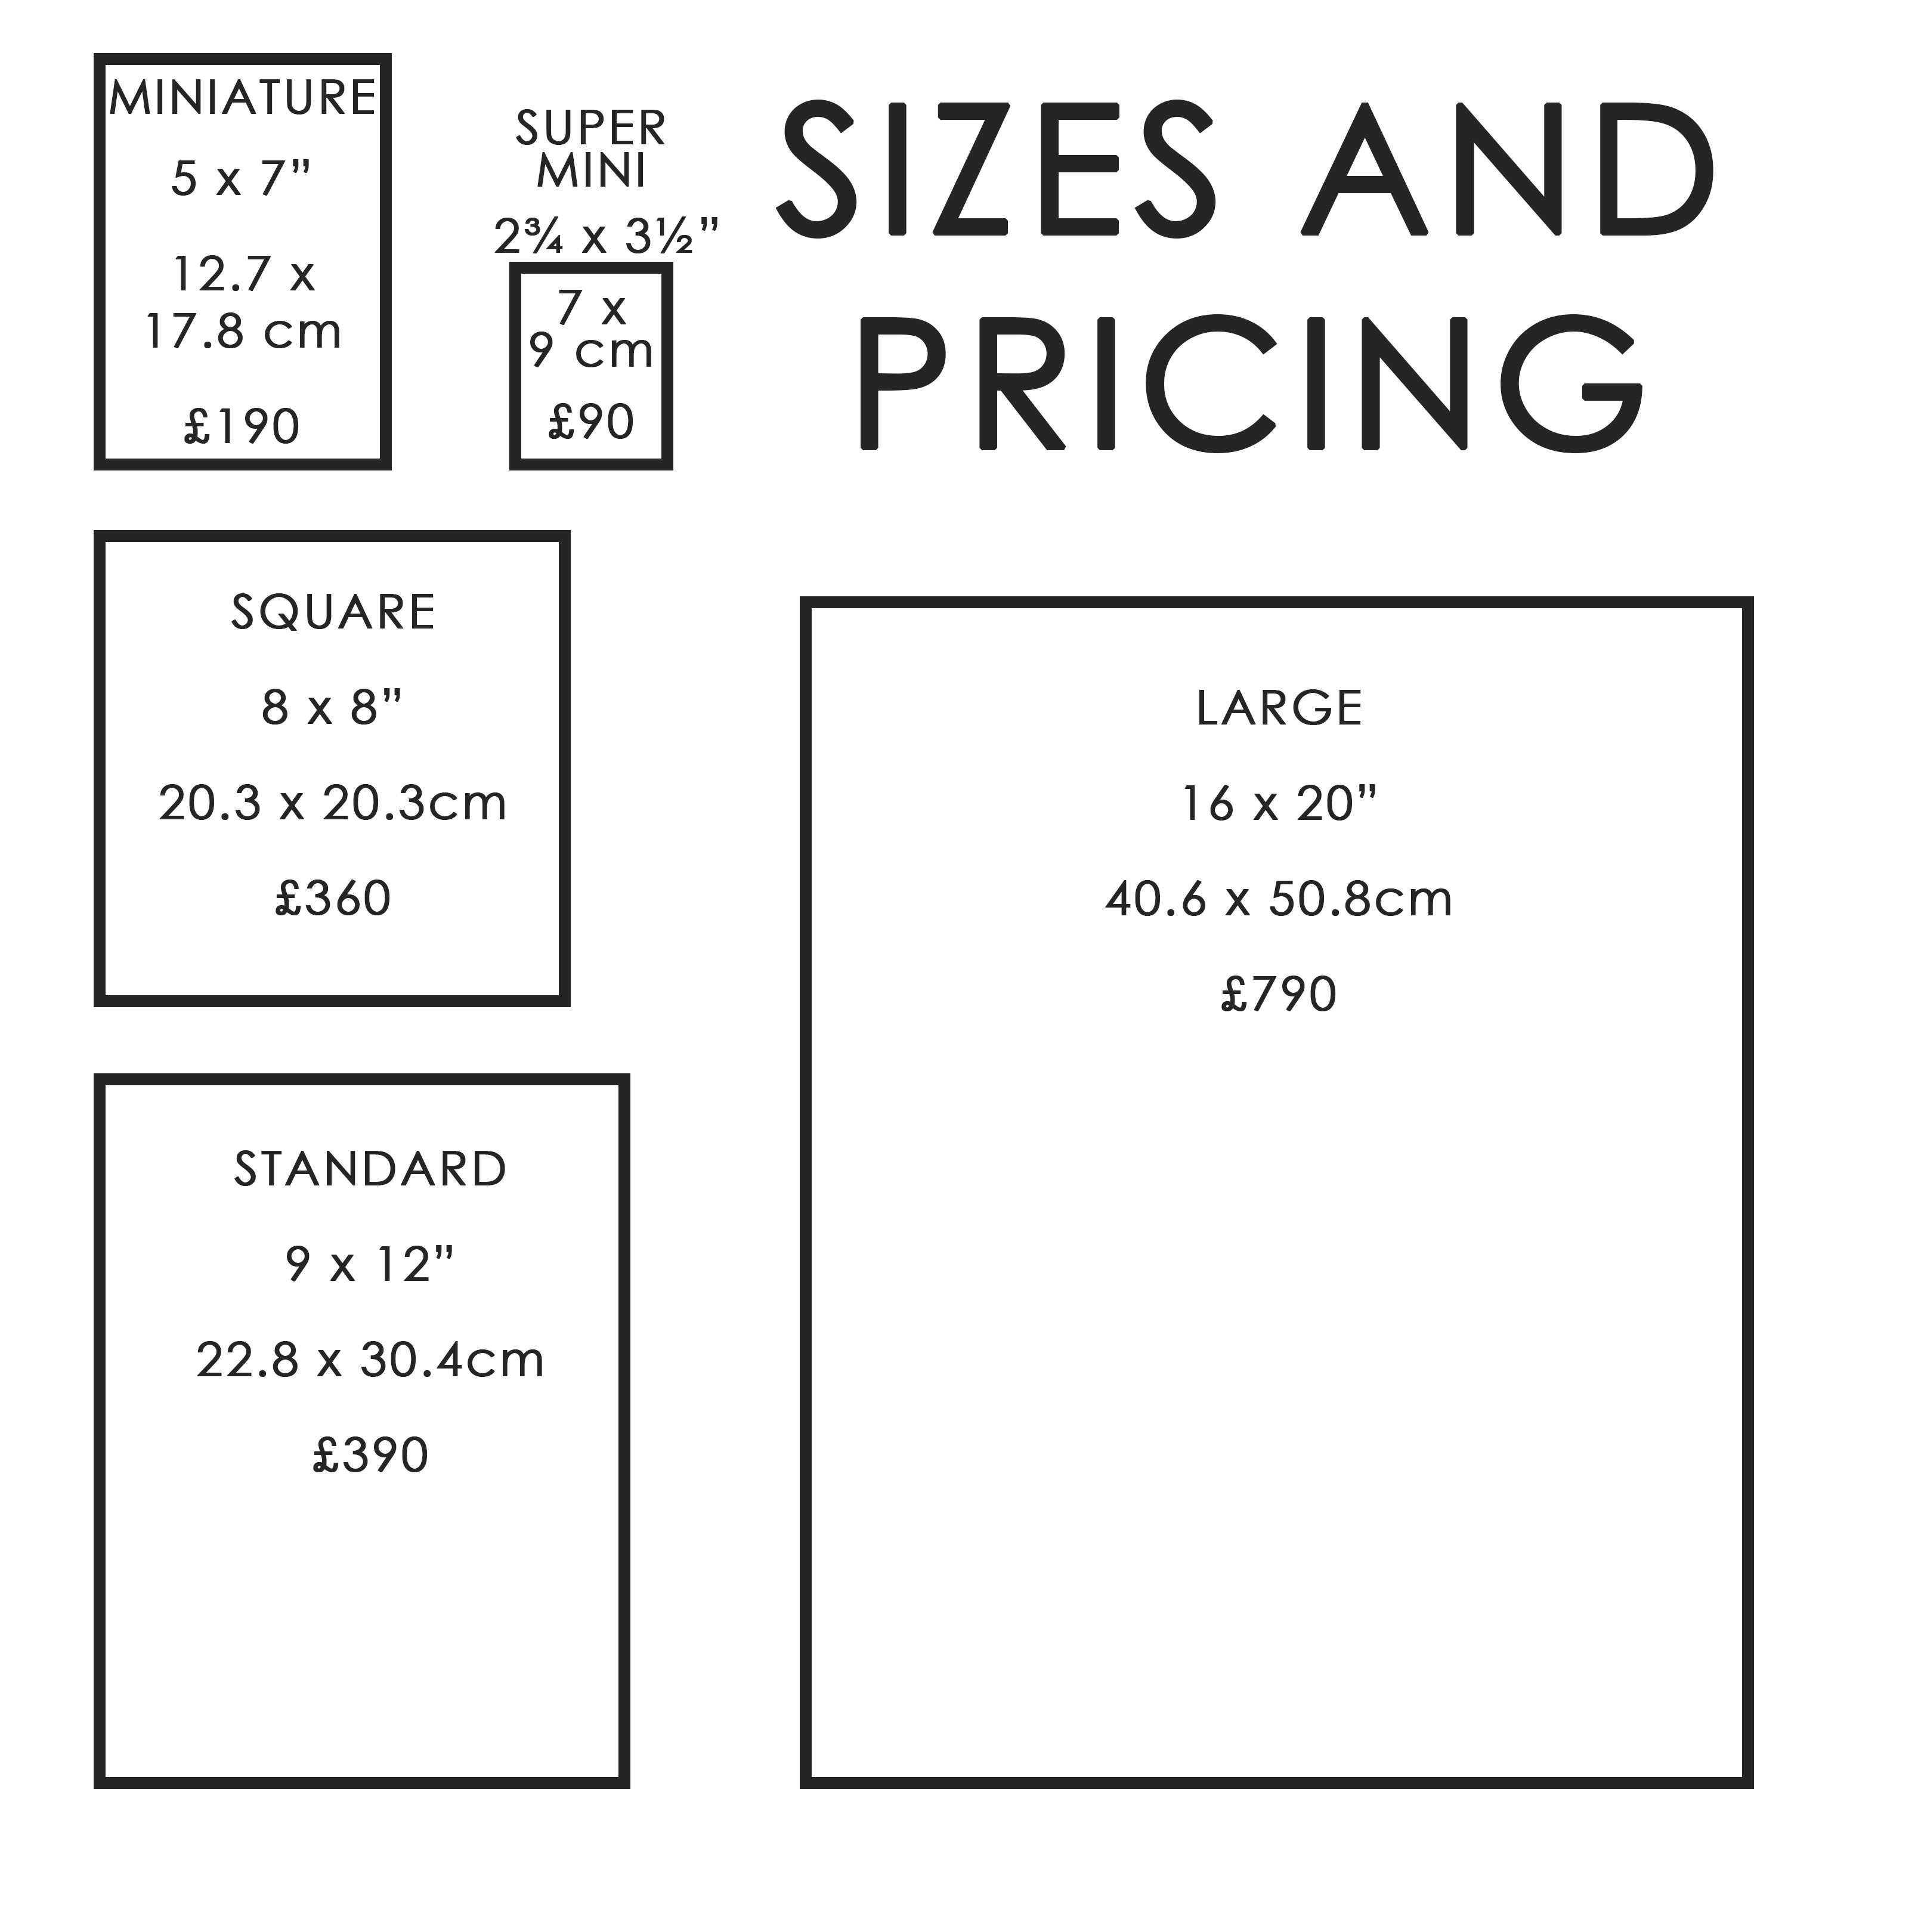 Sizes and Pricing